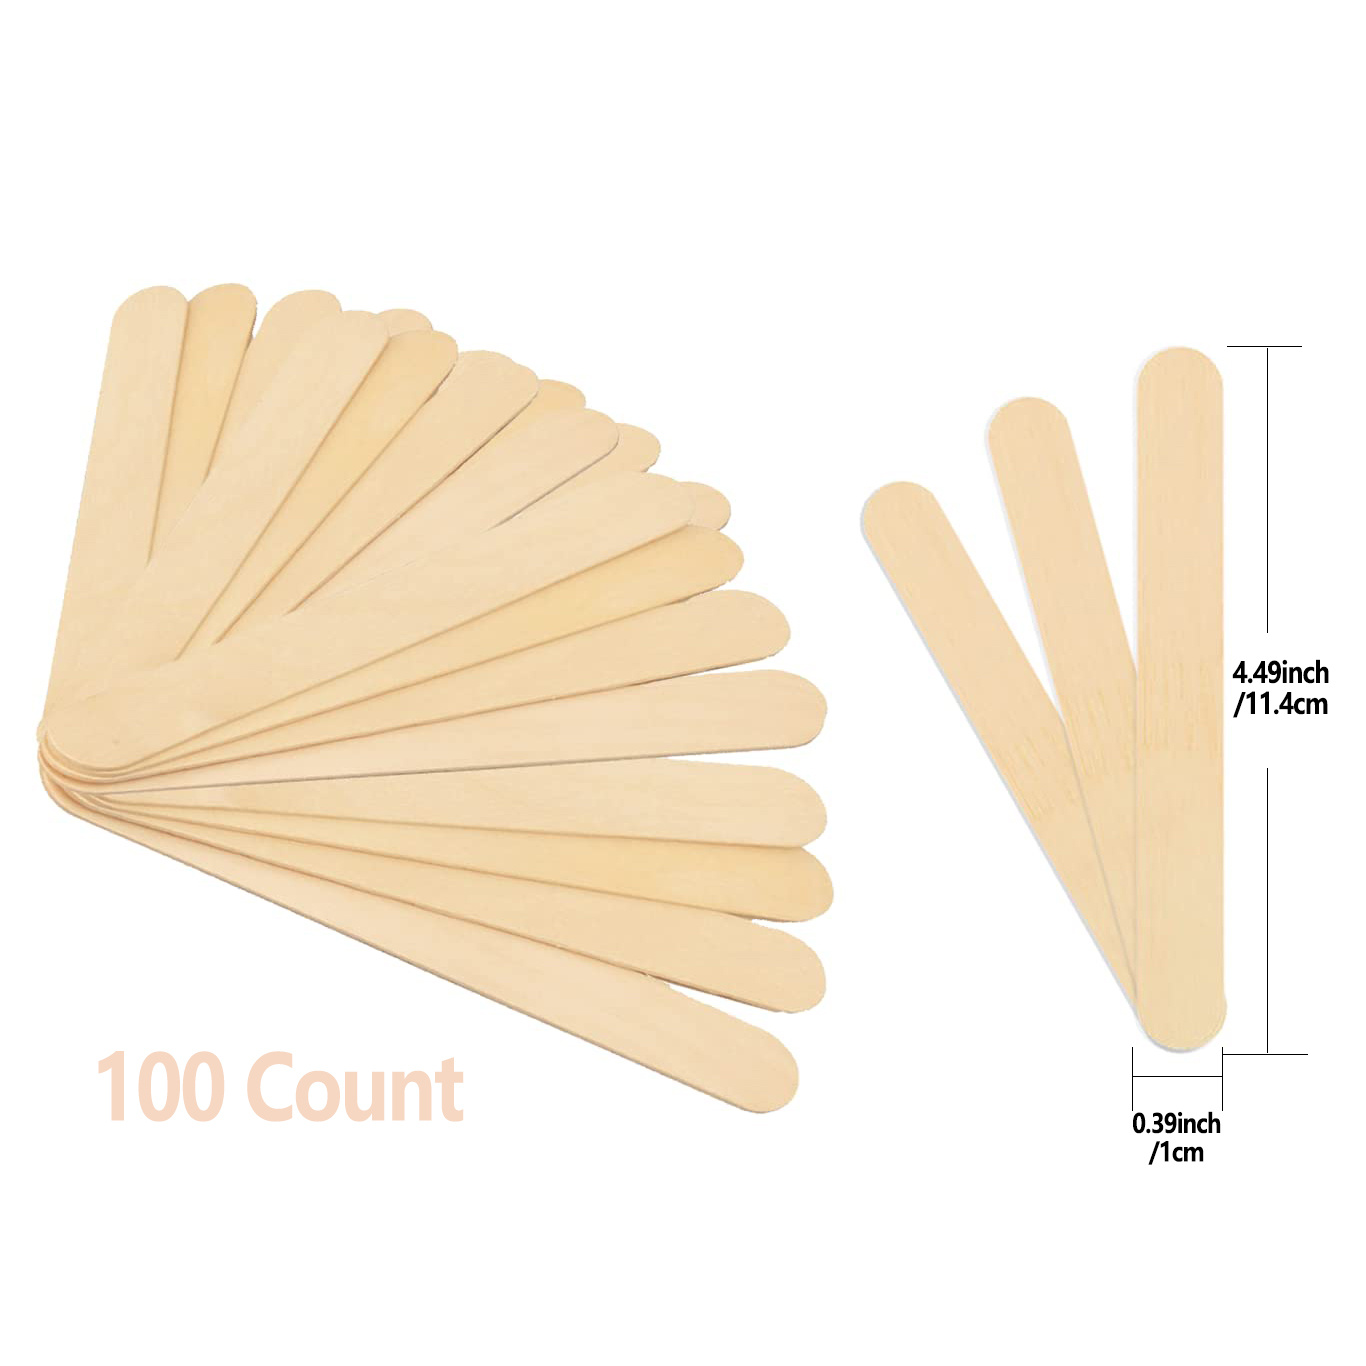 SelfTek 100 Pcs Wooden Wax Applicator Spatulas Sticks for Hair Removal and  Smooth Skin, Wax Popsicle Stick Eyebrow Waxing Sticks for Lip, Nose Wax